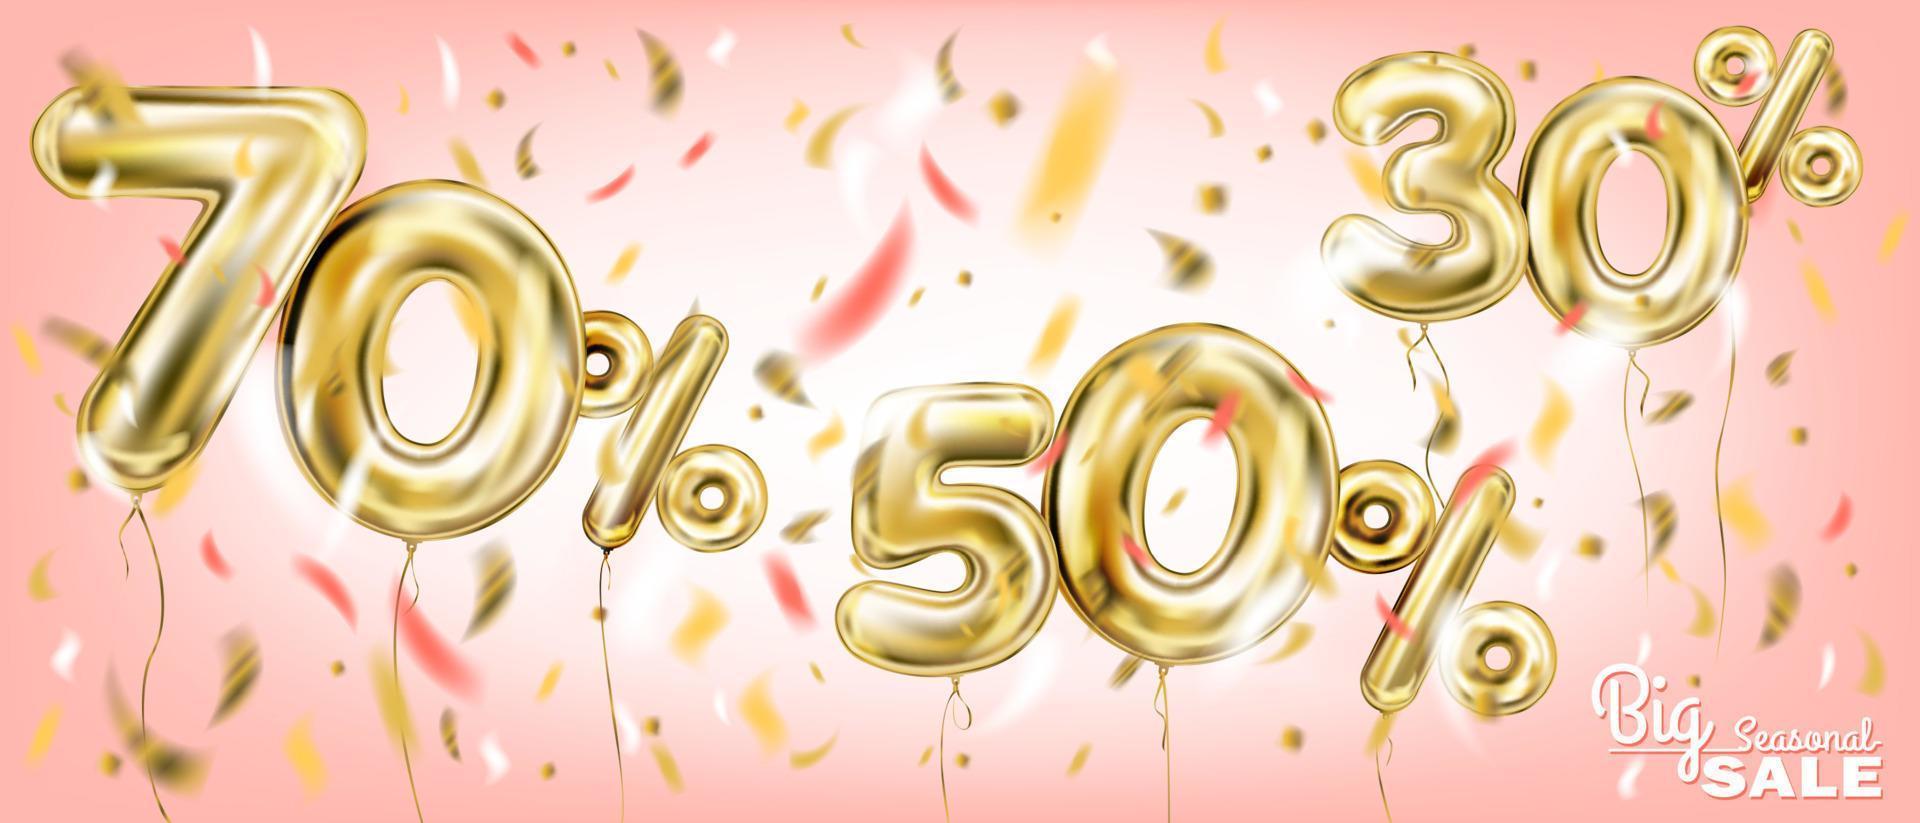 High quality vector image of gold balloon seventy fifty thirty percent. Design for seasonal sales, discounts and any events, coral pink background